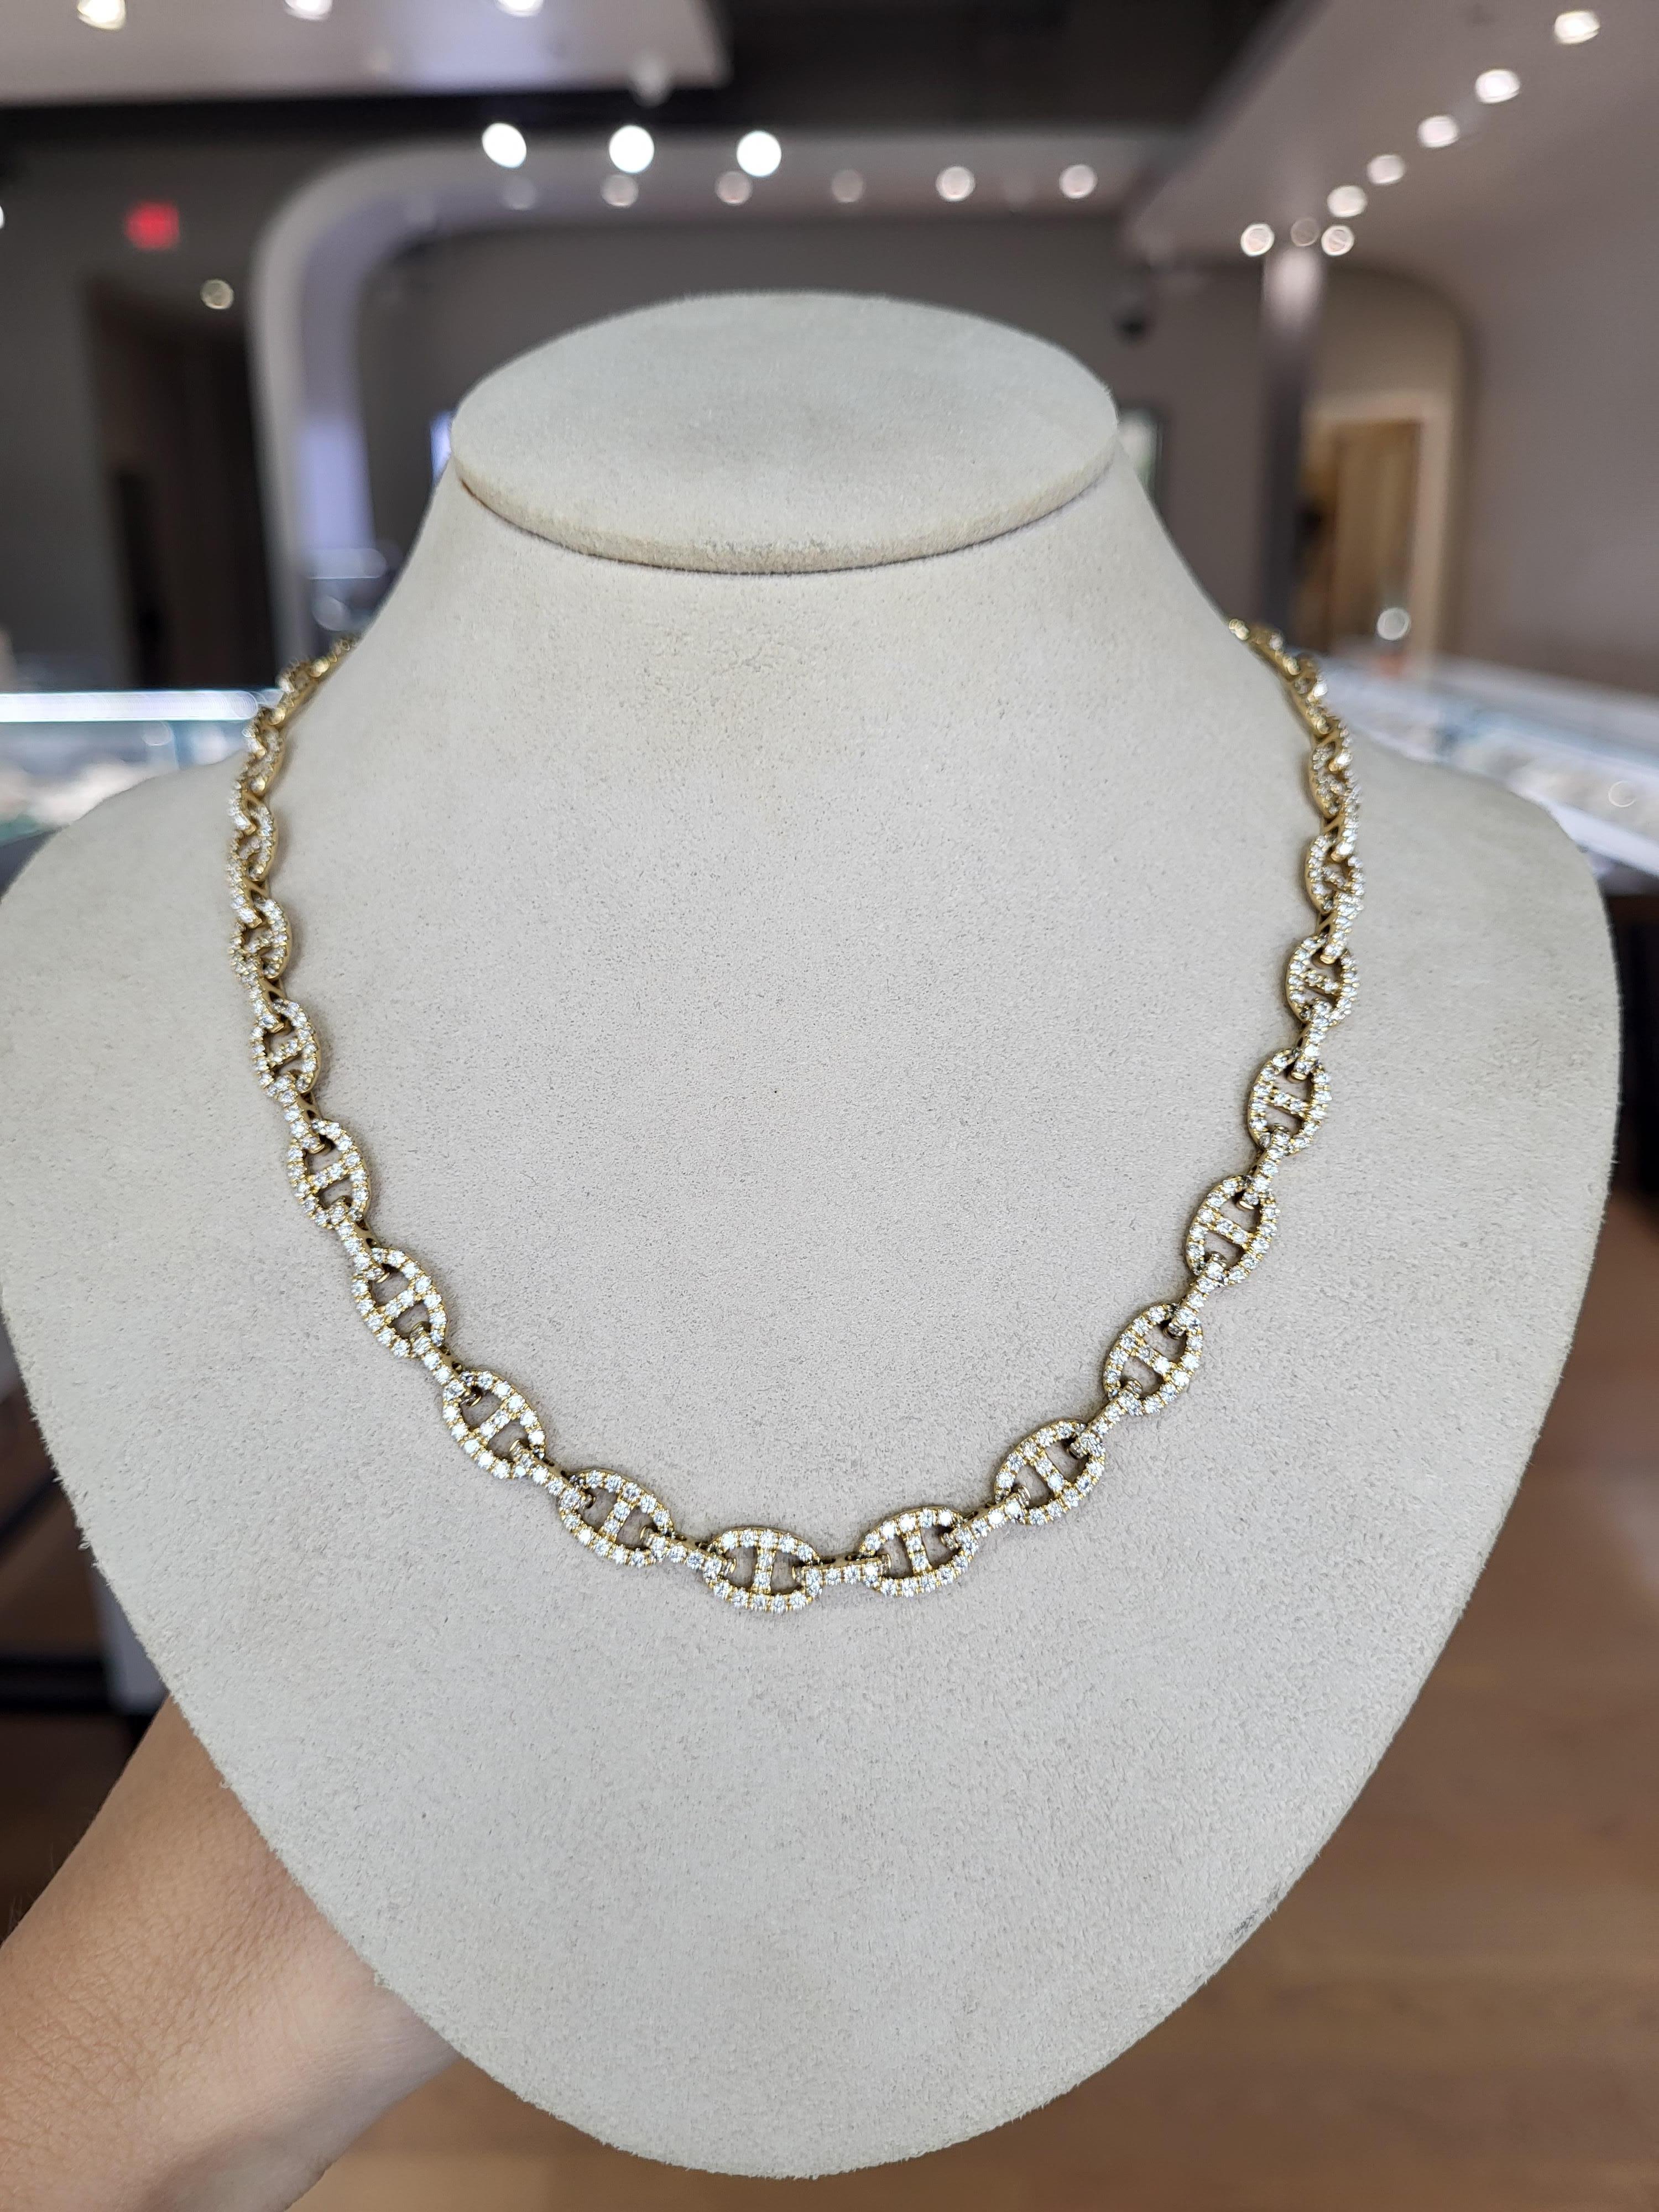 18 Karat Yellow Gold 6.22 Carat Total Weight Round Diamond Link Necklace For Sale 5